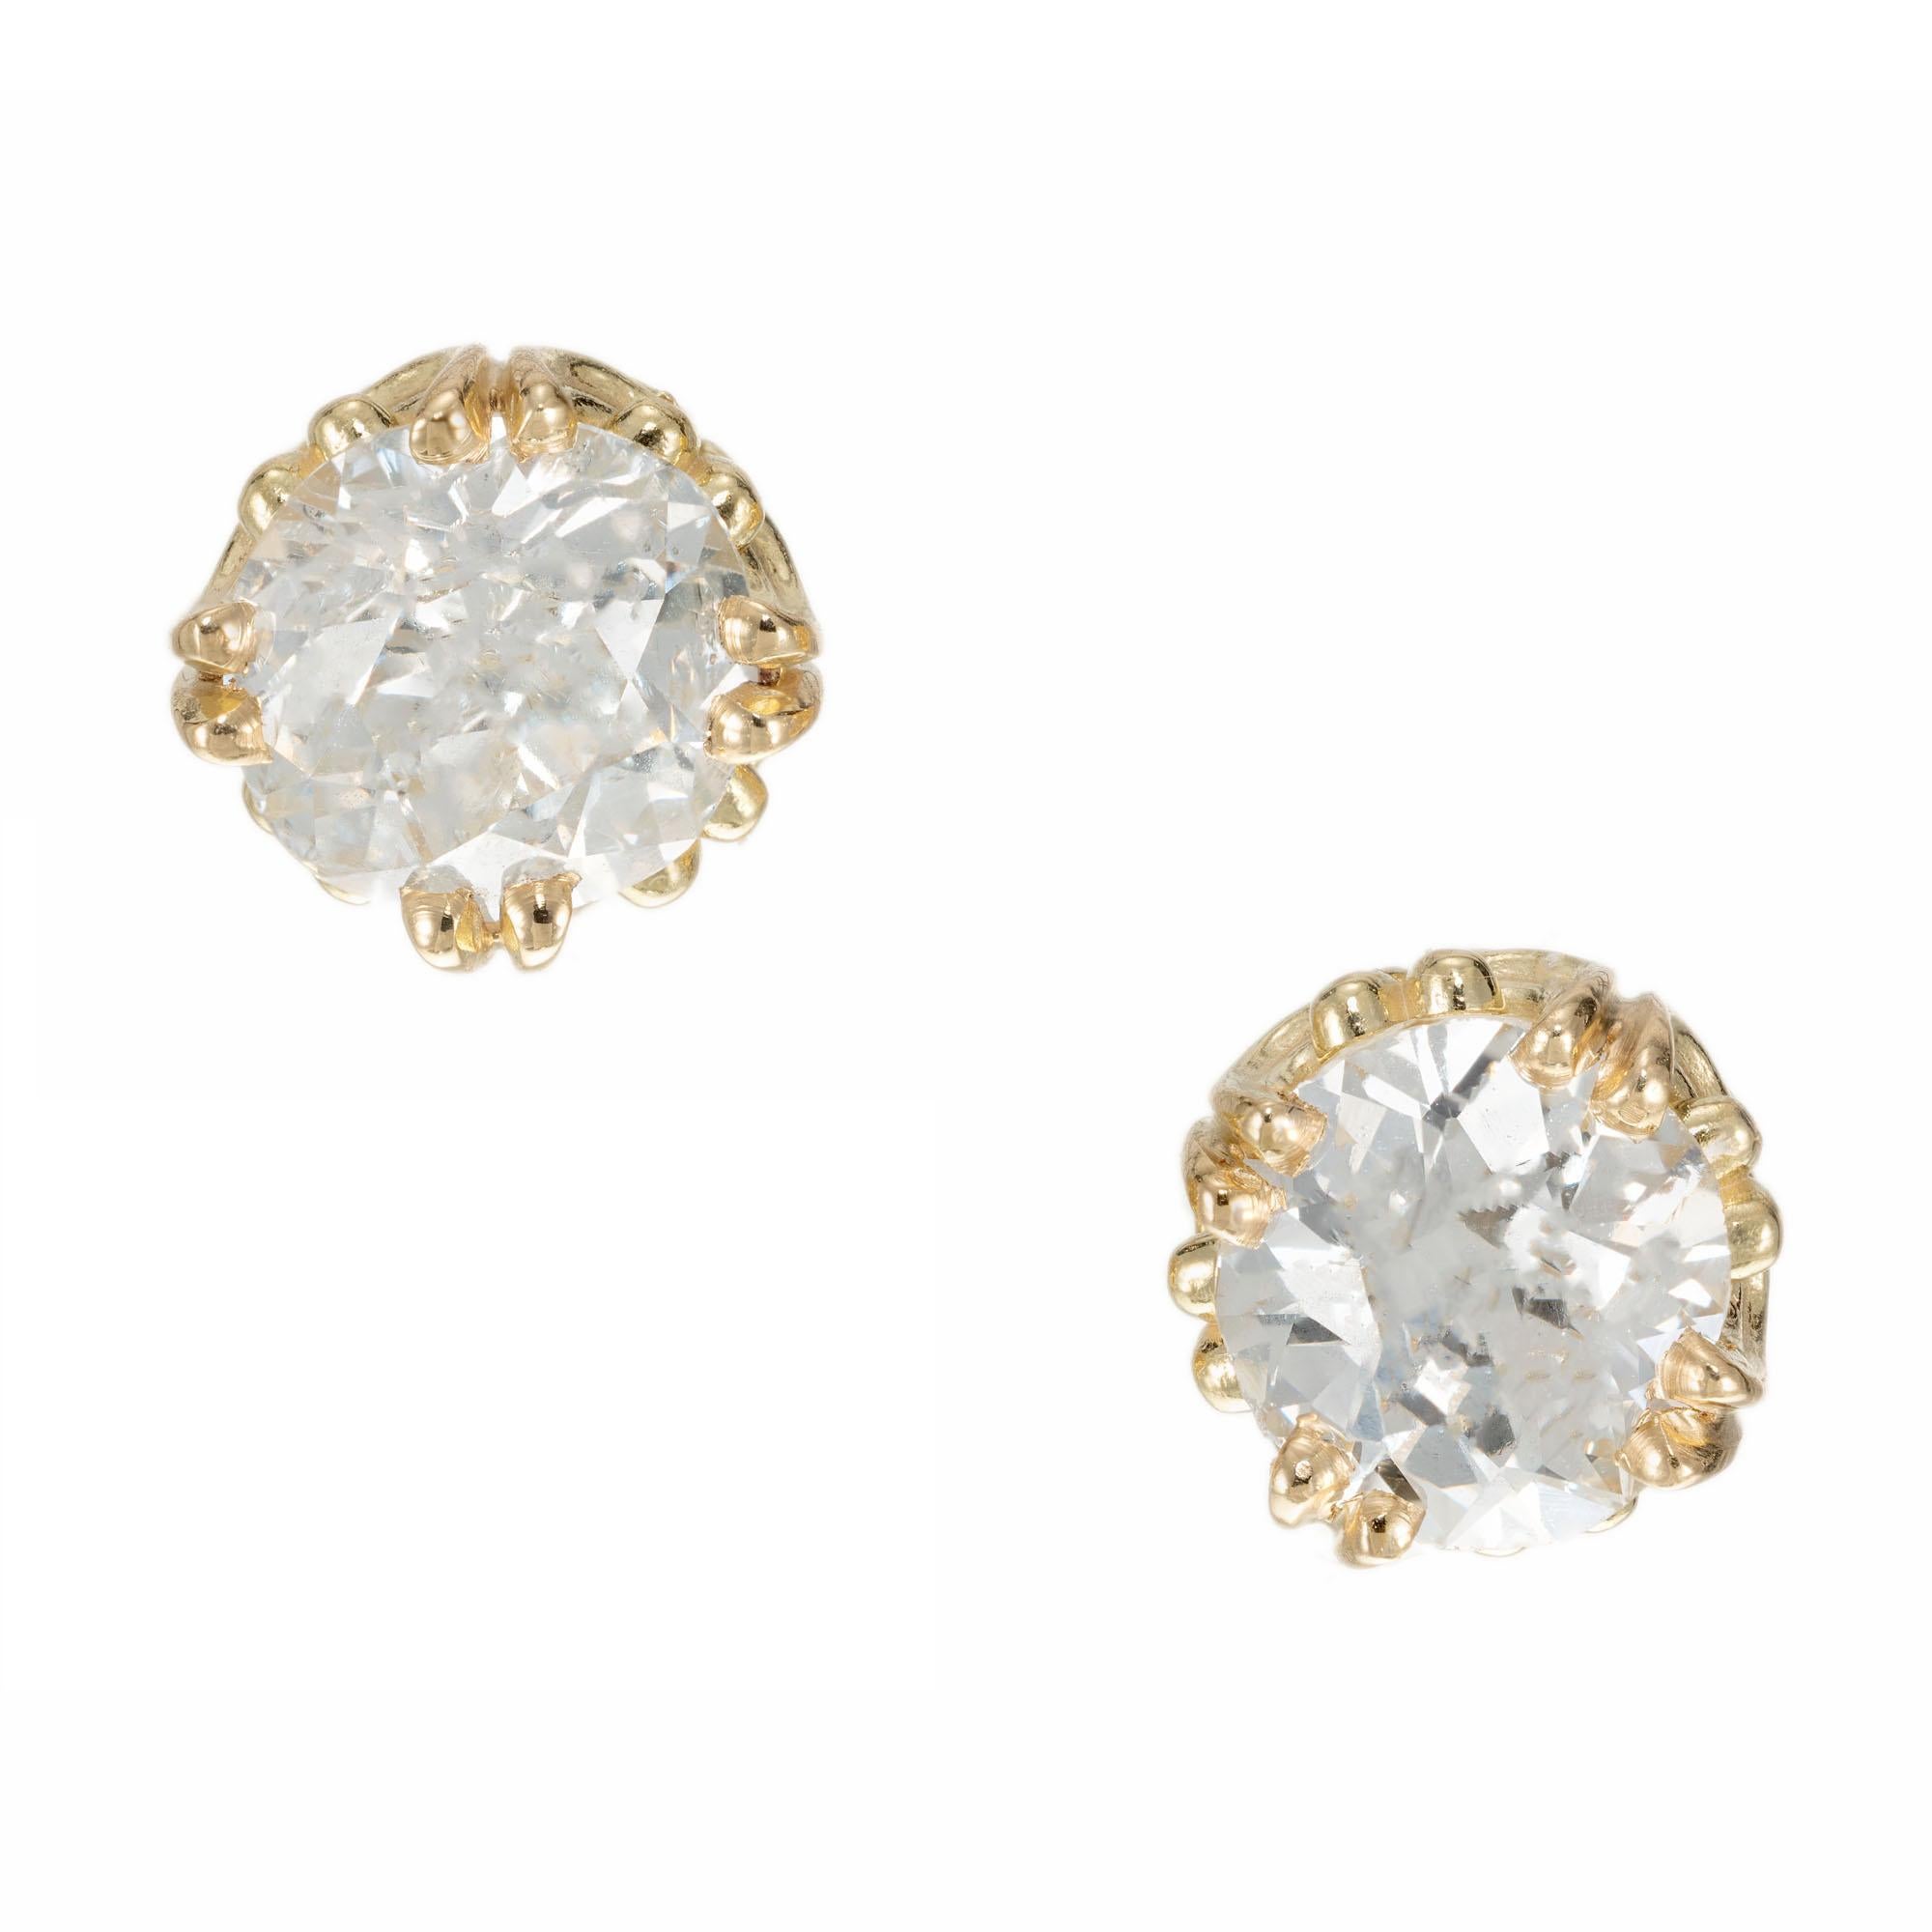 Open scroll design basket diamond stud earrings.  1 Old European cut 1.11ct diamond and one round brilliant cut 1.30ct diamond set in 18k yellow gold. Both stones are from a 1920's estate and certified by the EGL. Settings created in the Peter Suchy